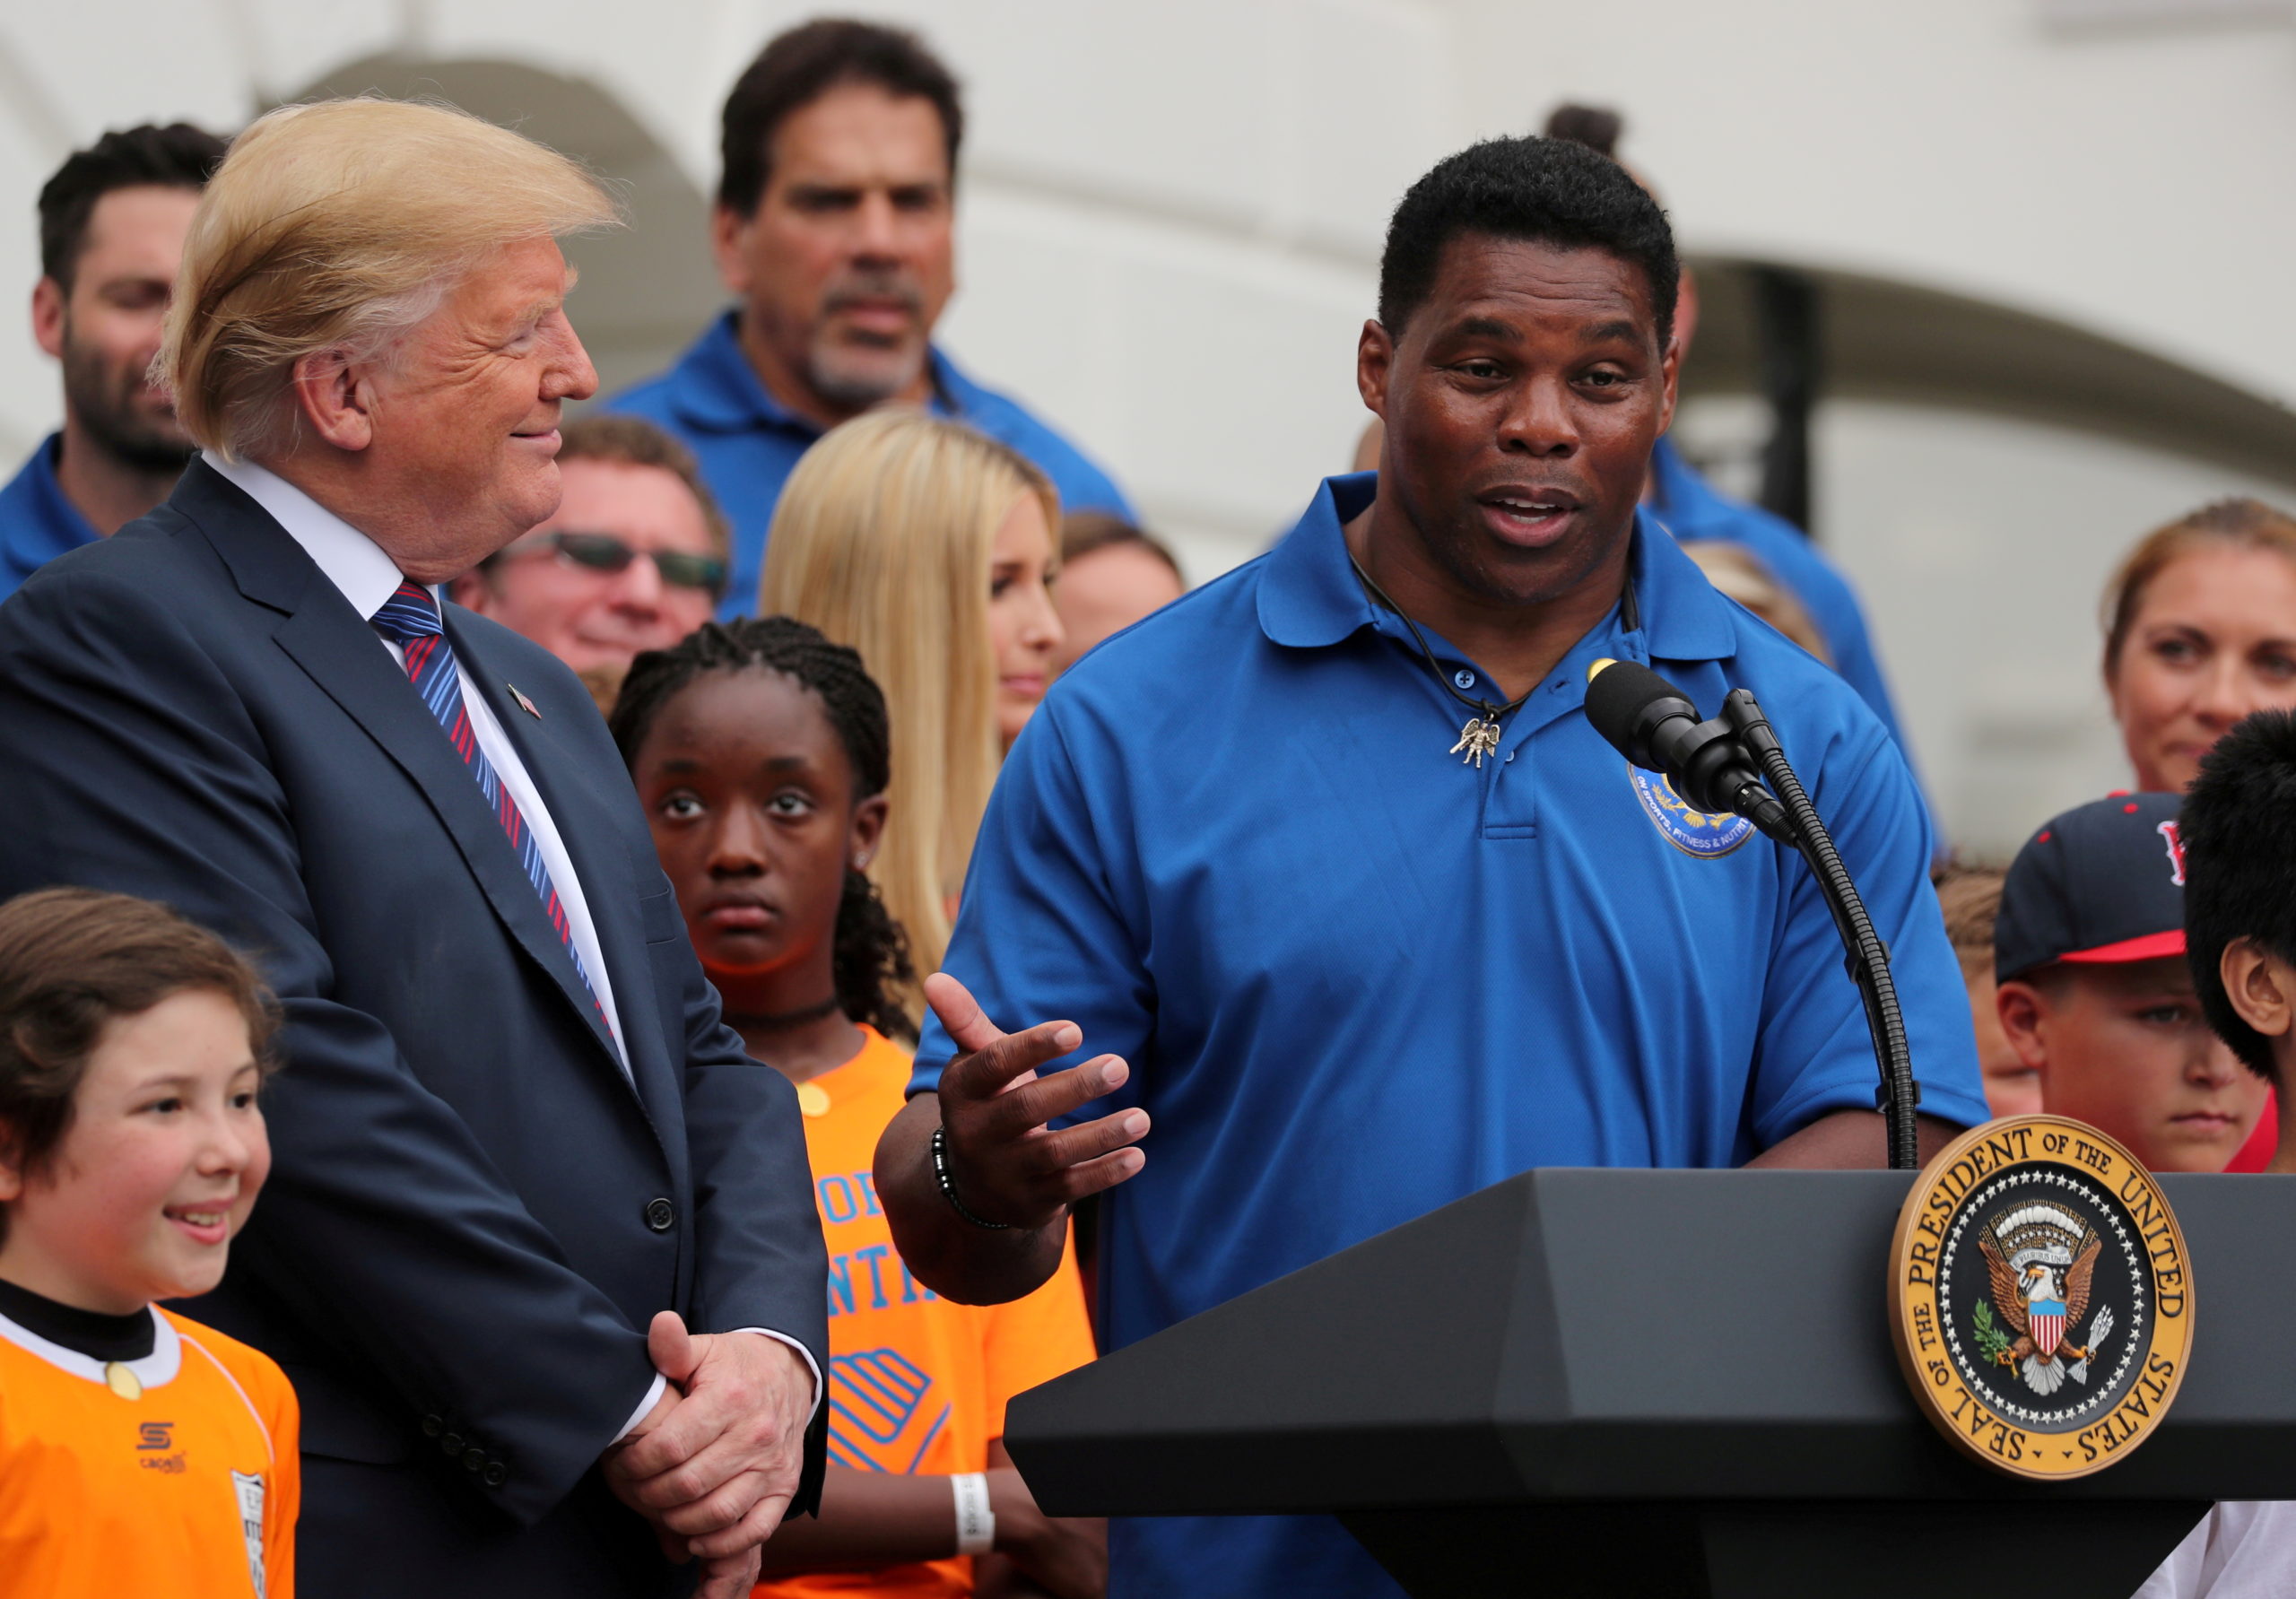 Herschel Walker Busted Before The Primary Acting As Spokesperson For Program That Preyed Upon Vets And Defrauded The Government